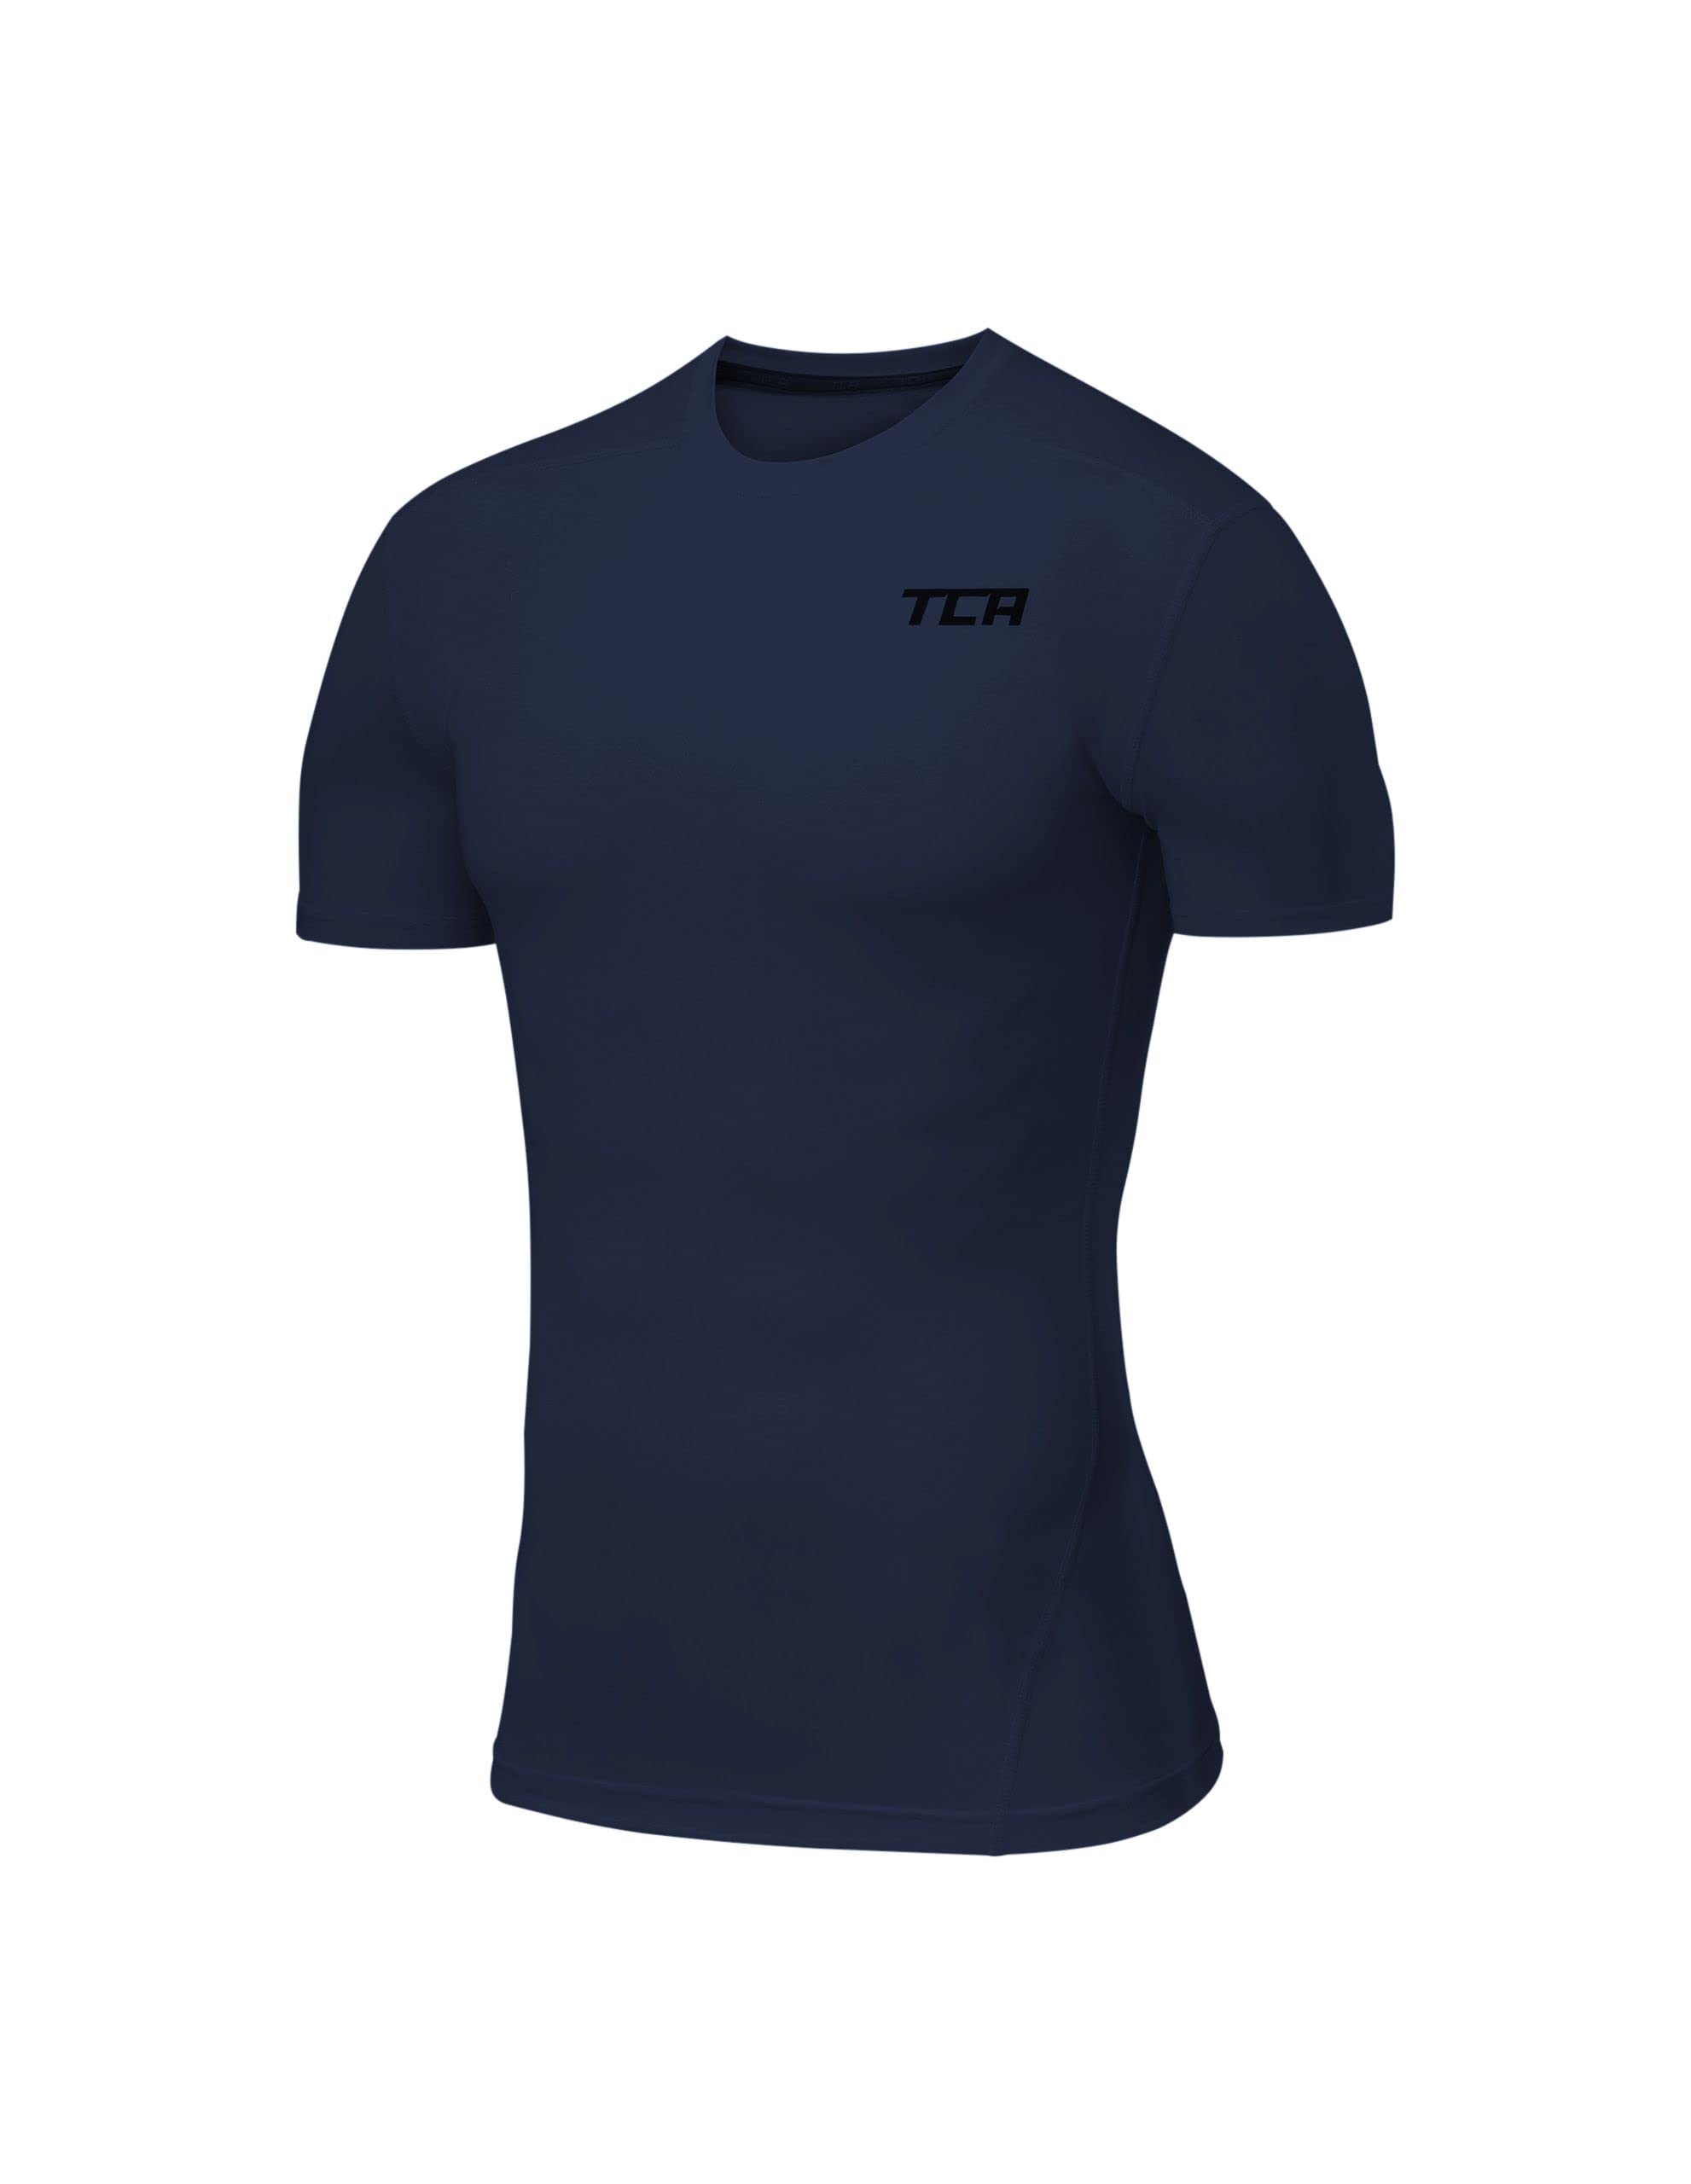 TCA Men's & Boys' Pro Performance Compression Base Layer Short Sleeve  Thermal Top Navy Eclipse 12-14 Years